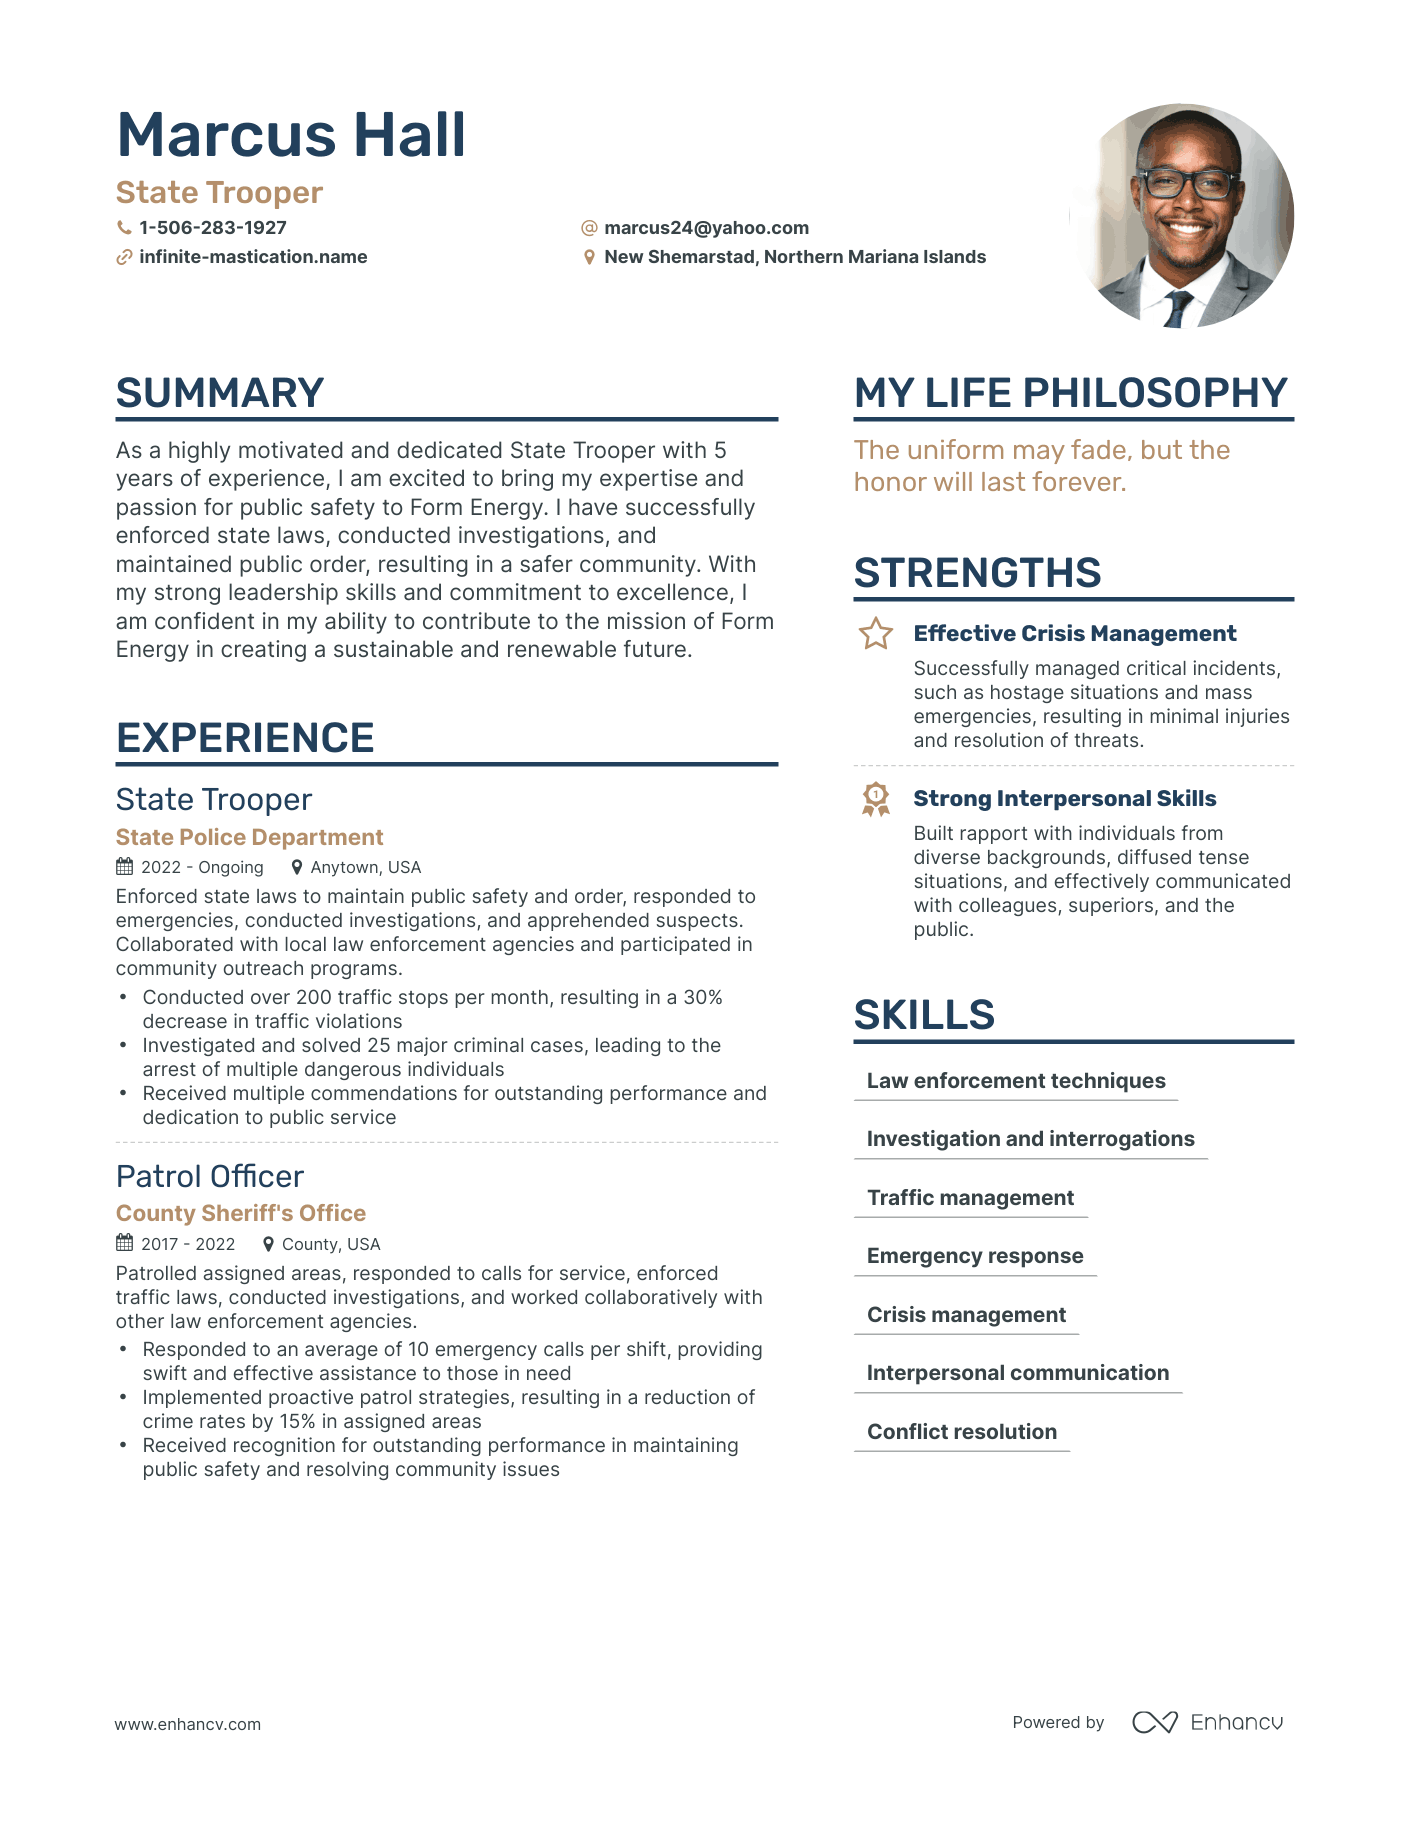 State Trooper resume example